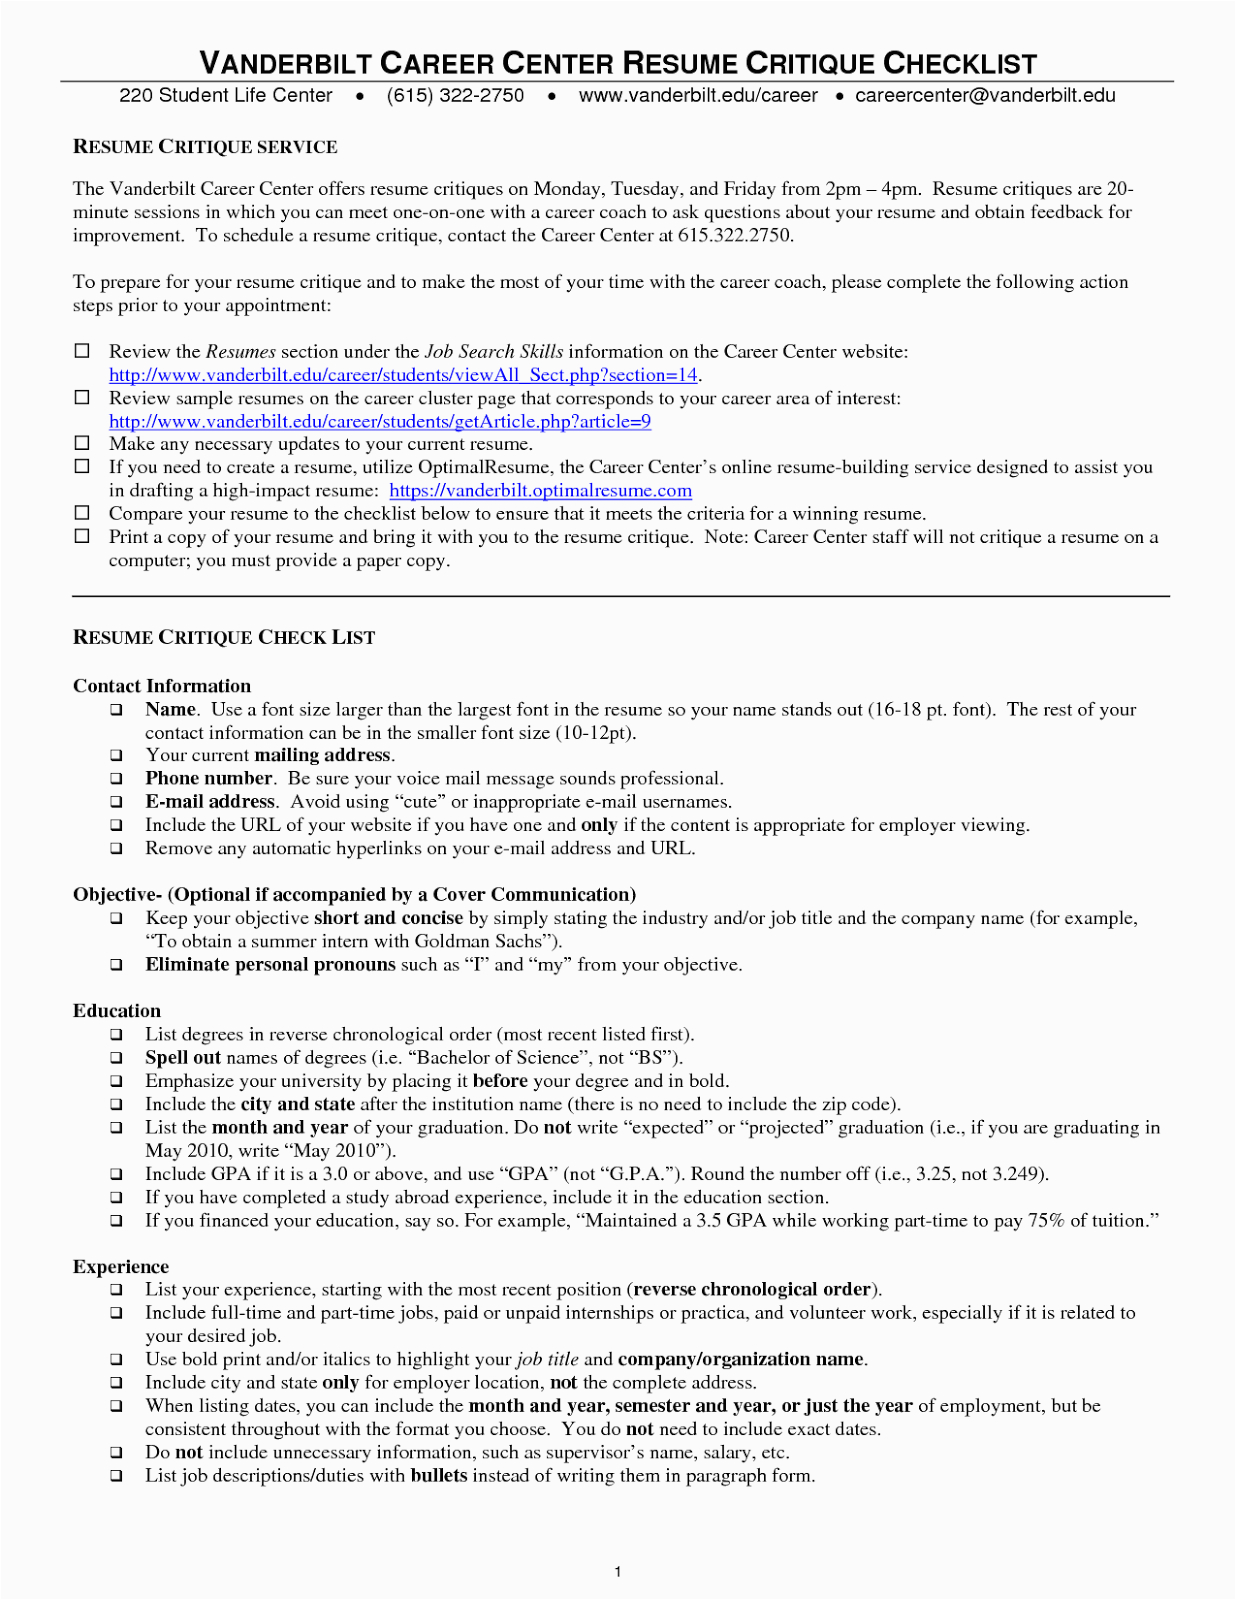 Law School Application Resume Template Download Sample Of A Resume for Law School Tipss Und Vorlagen